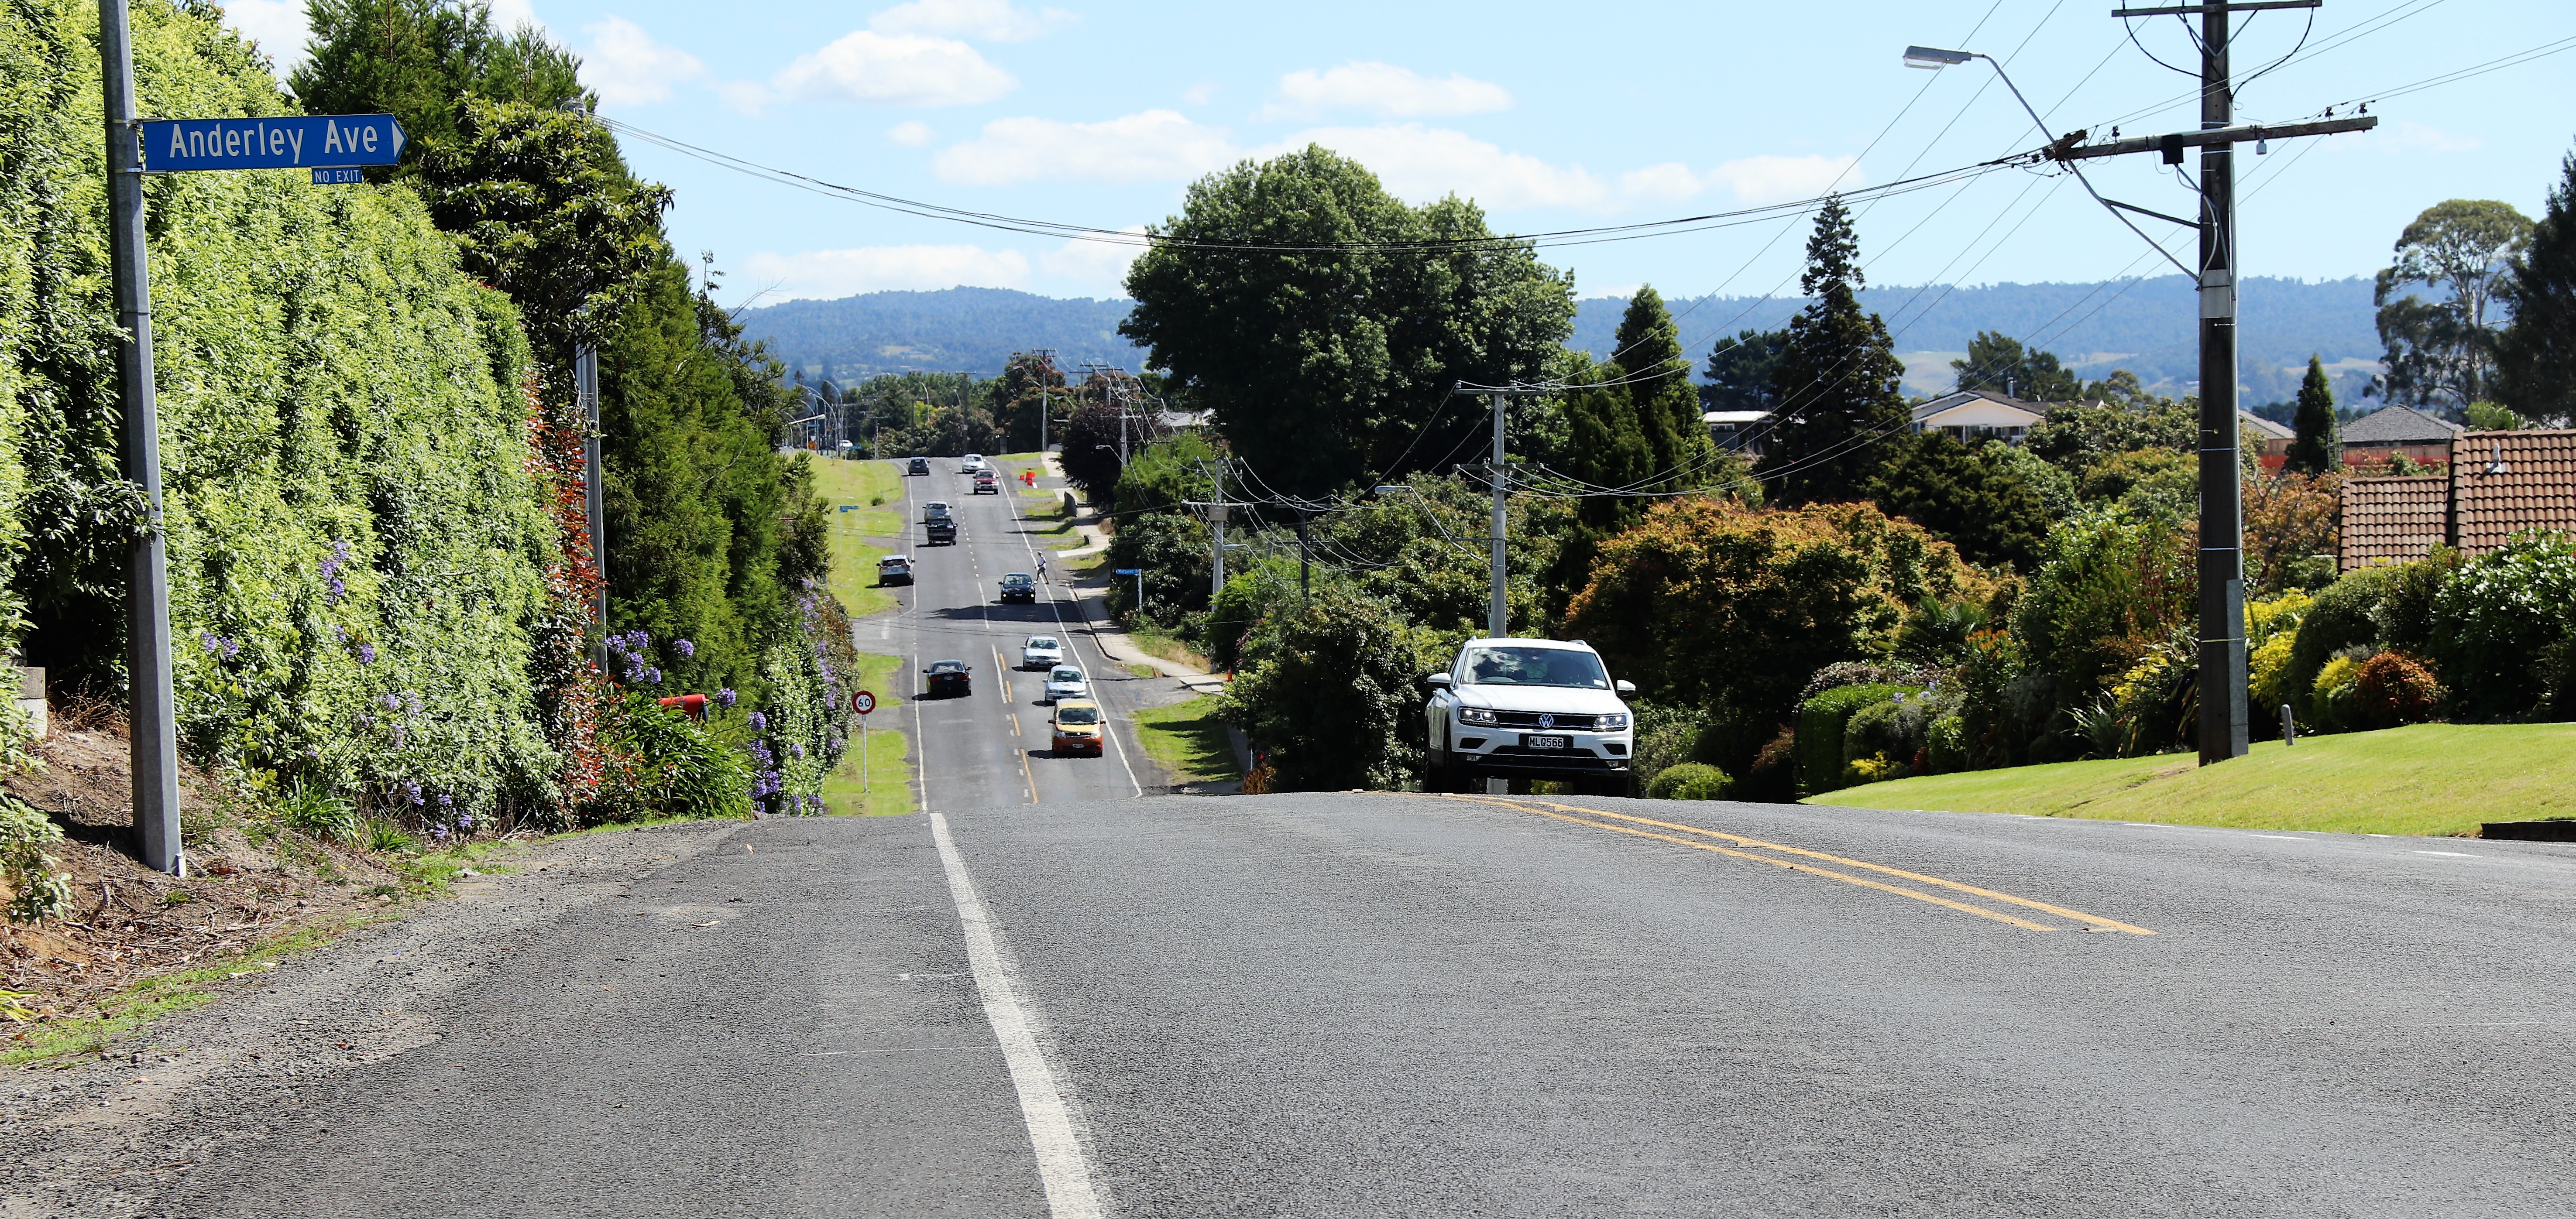 Construction on upgrading the stretch of Omokoroa Road from Western Avenue to Tralee Street is due to start this year.